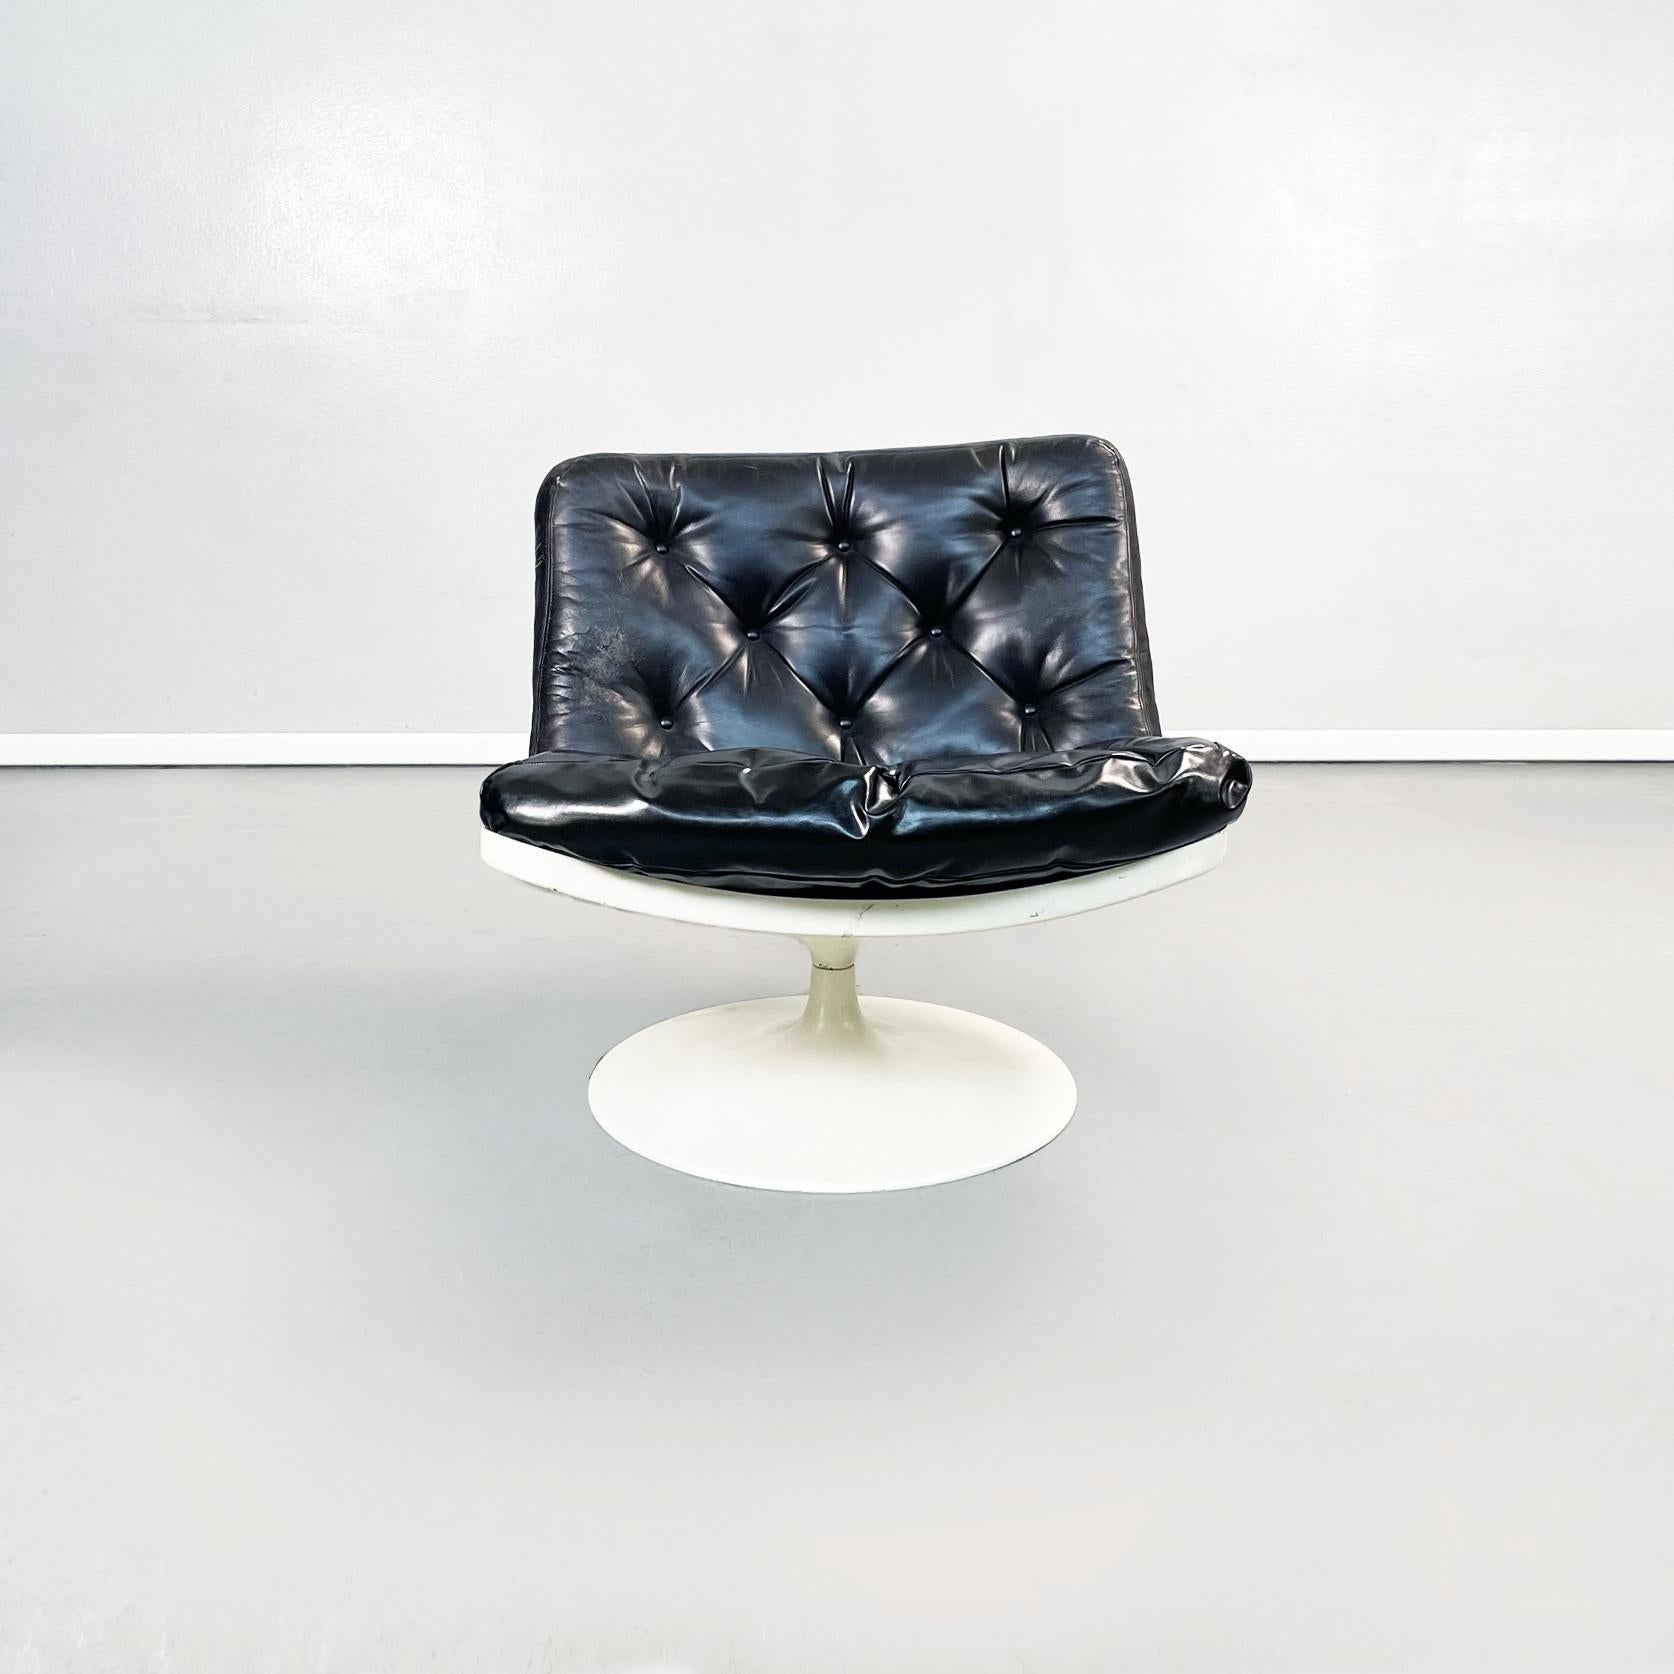 Italian space age Black leather and abs plastic armchair by Play, 1970s.
Armchair with Tulip style round base, in white swivel abs. The seat and back are composed of two padded and stitched cushions in black leather.
Produced by Play in 1970s.